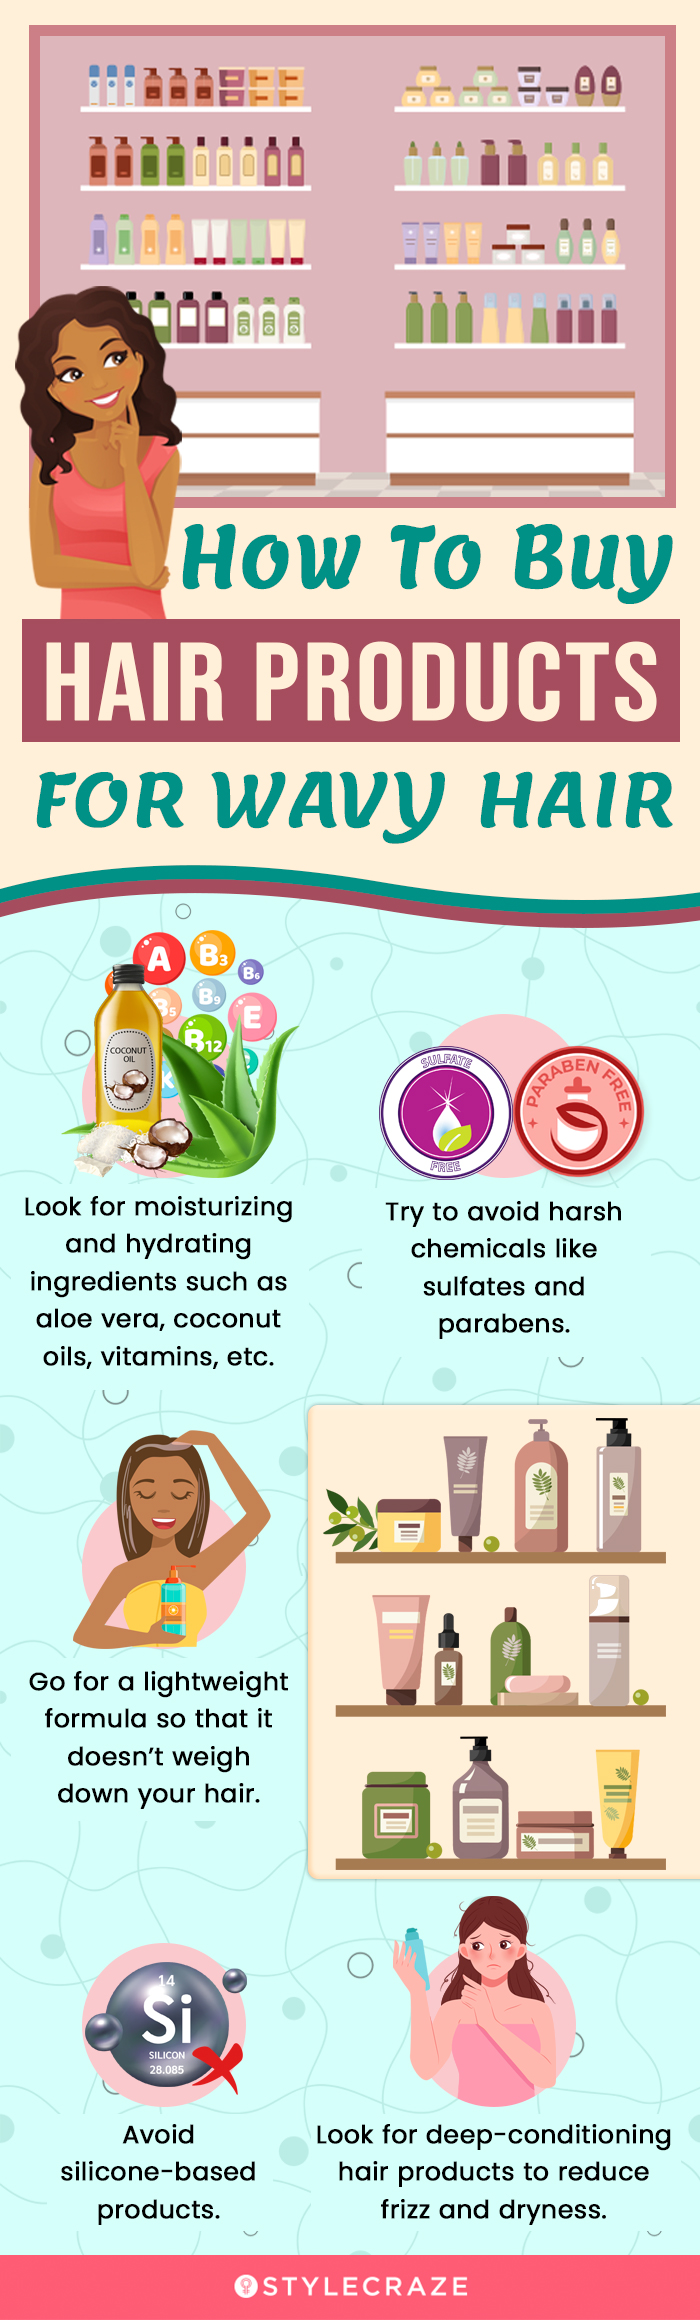 How To Buy Hair Products For Wavy Hair (infographic)